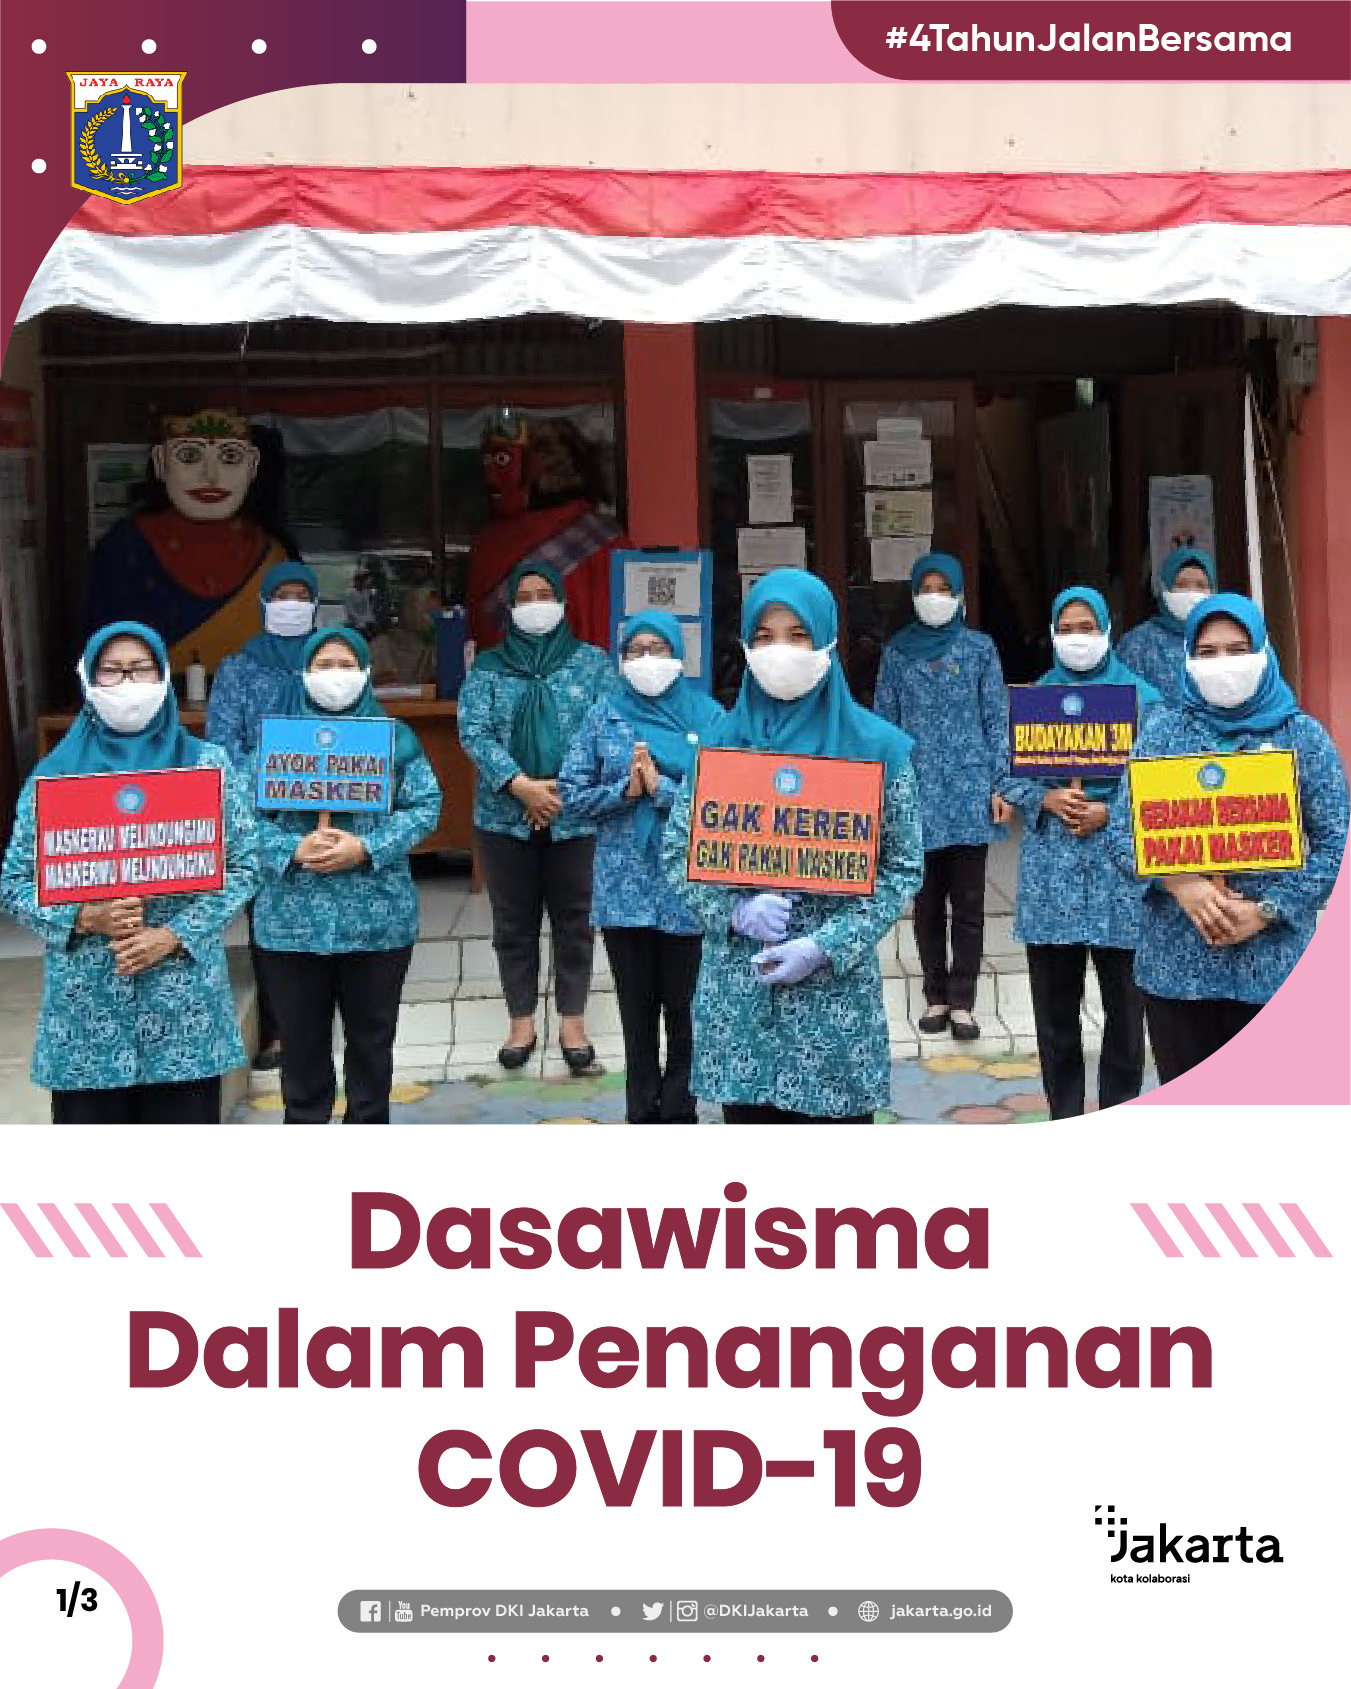 Dasawisma in Covid-19 Management